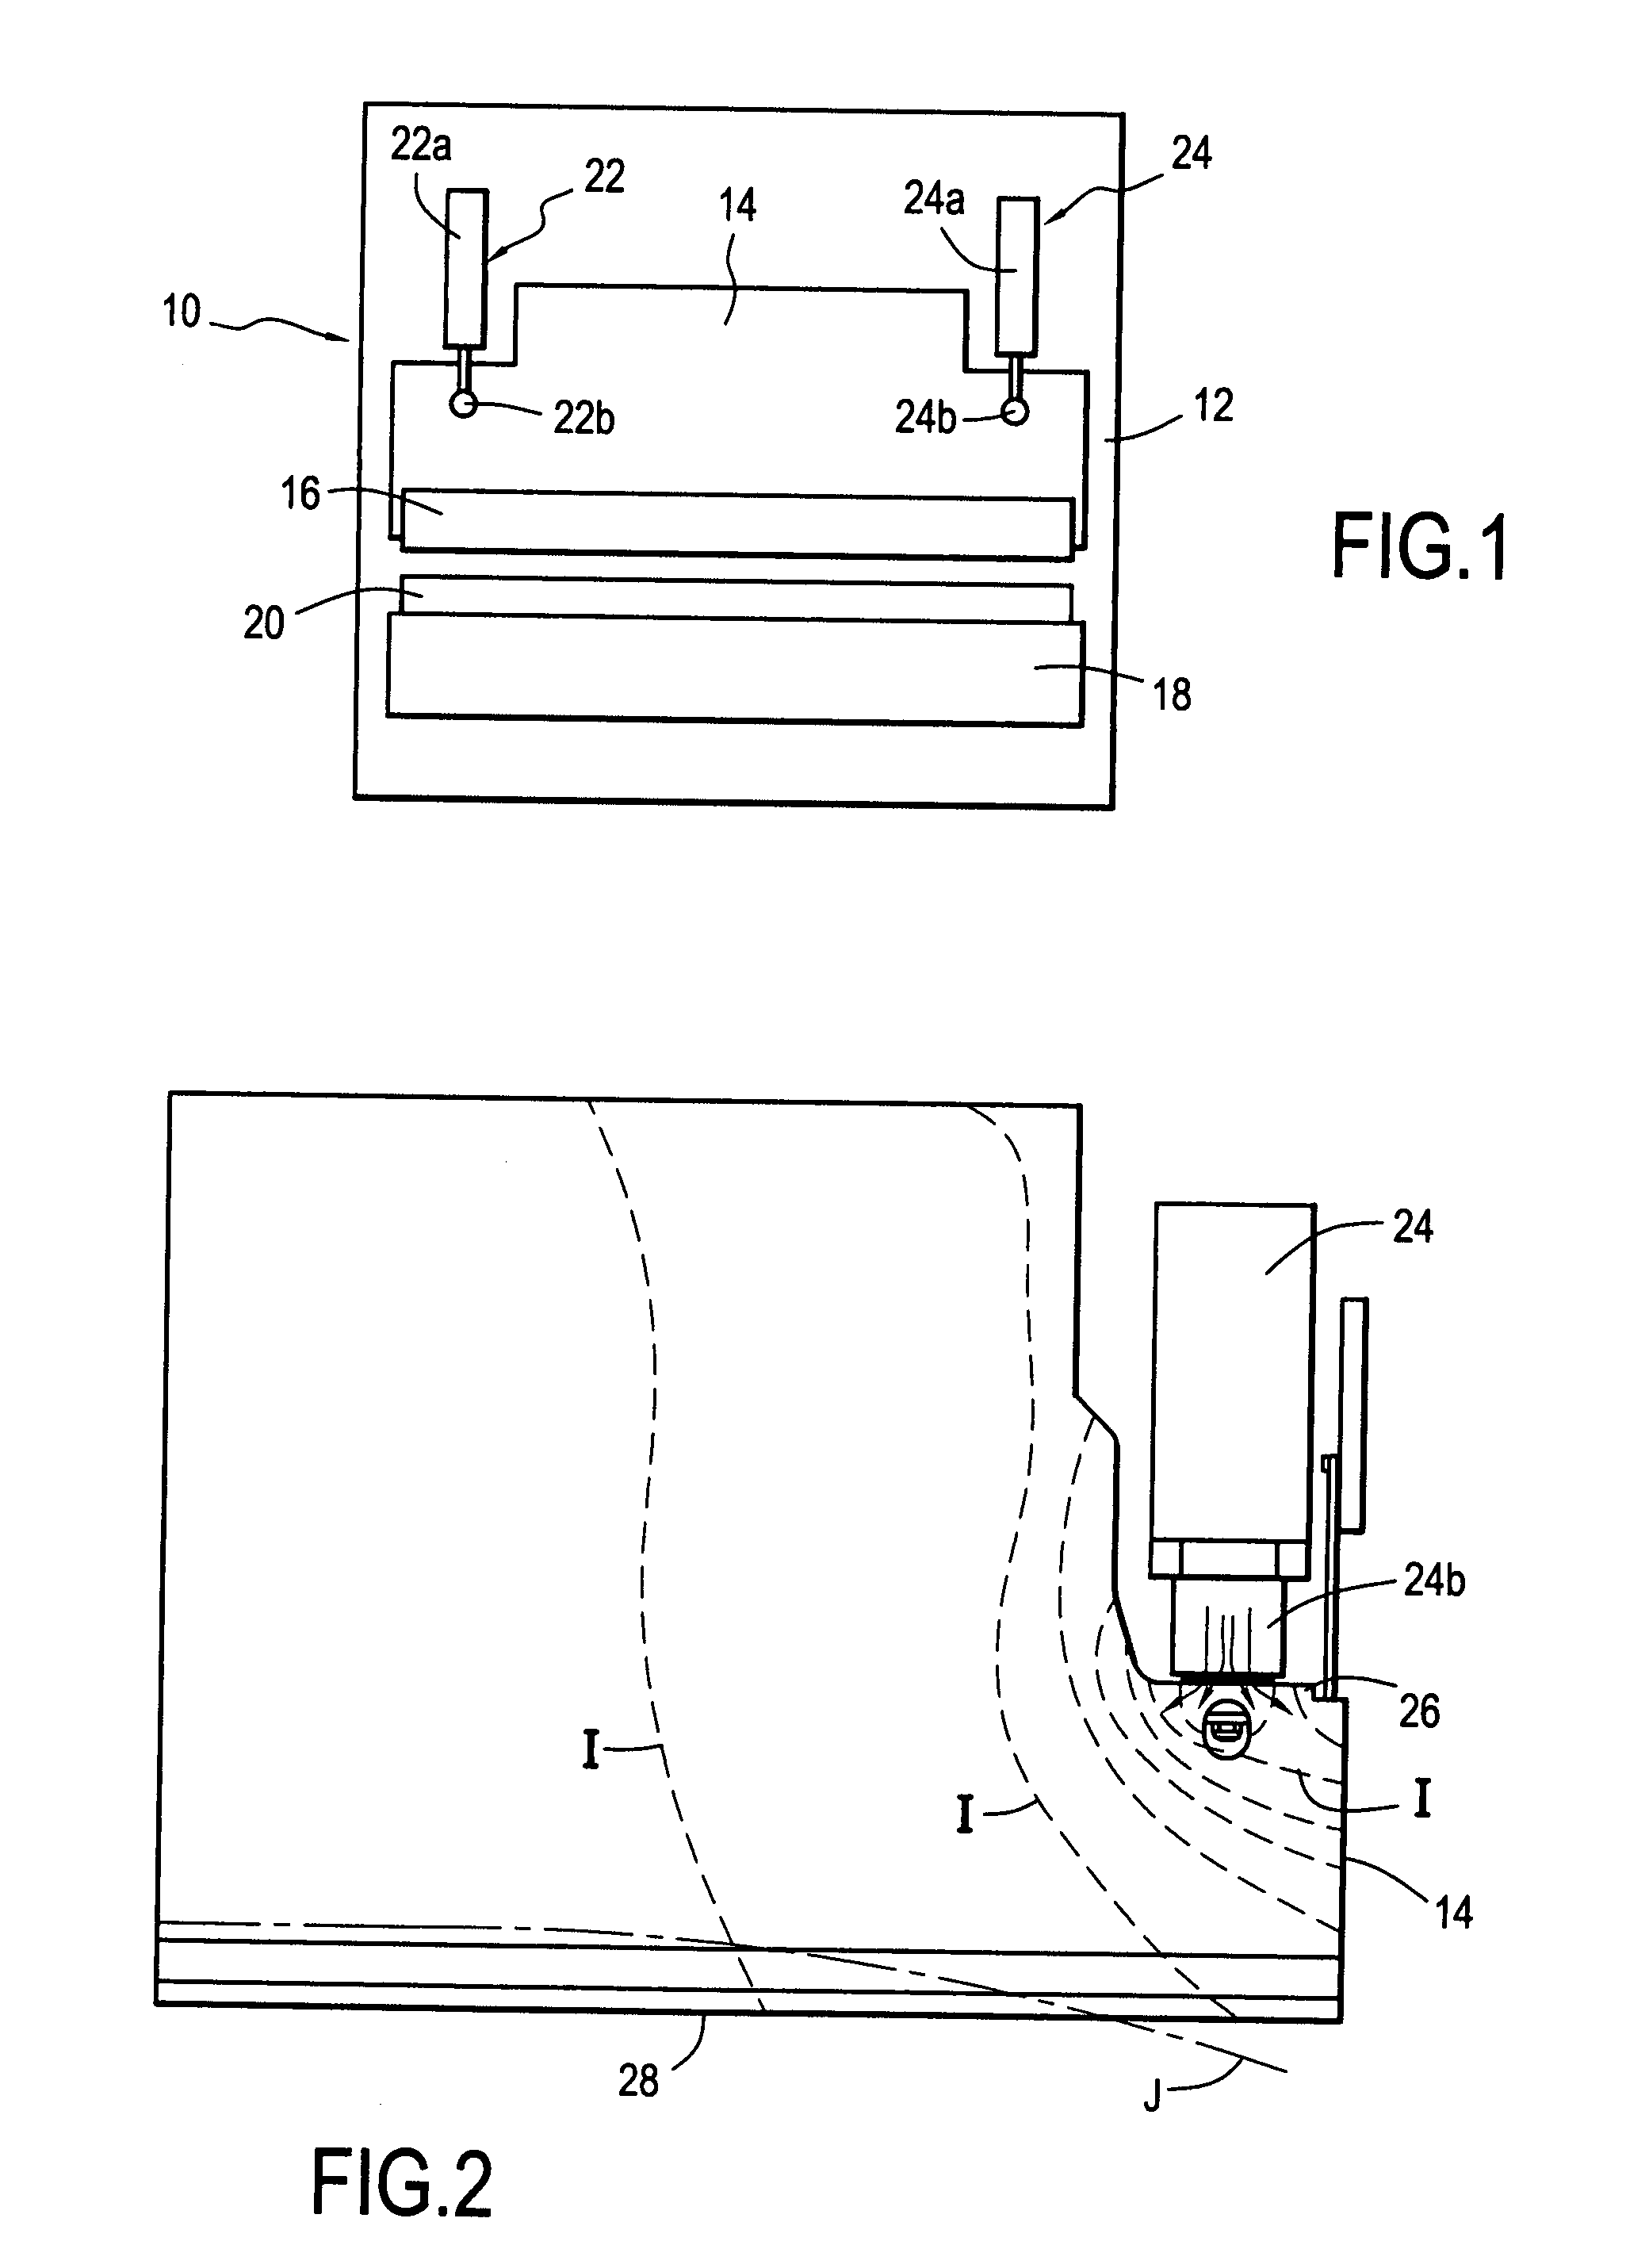 Mechanical connection for transferring forces while providing insulation